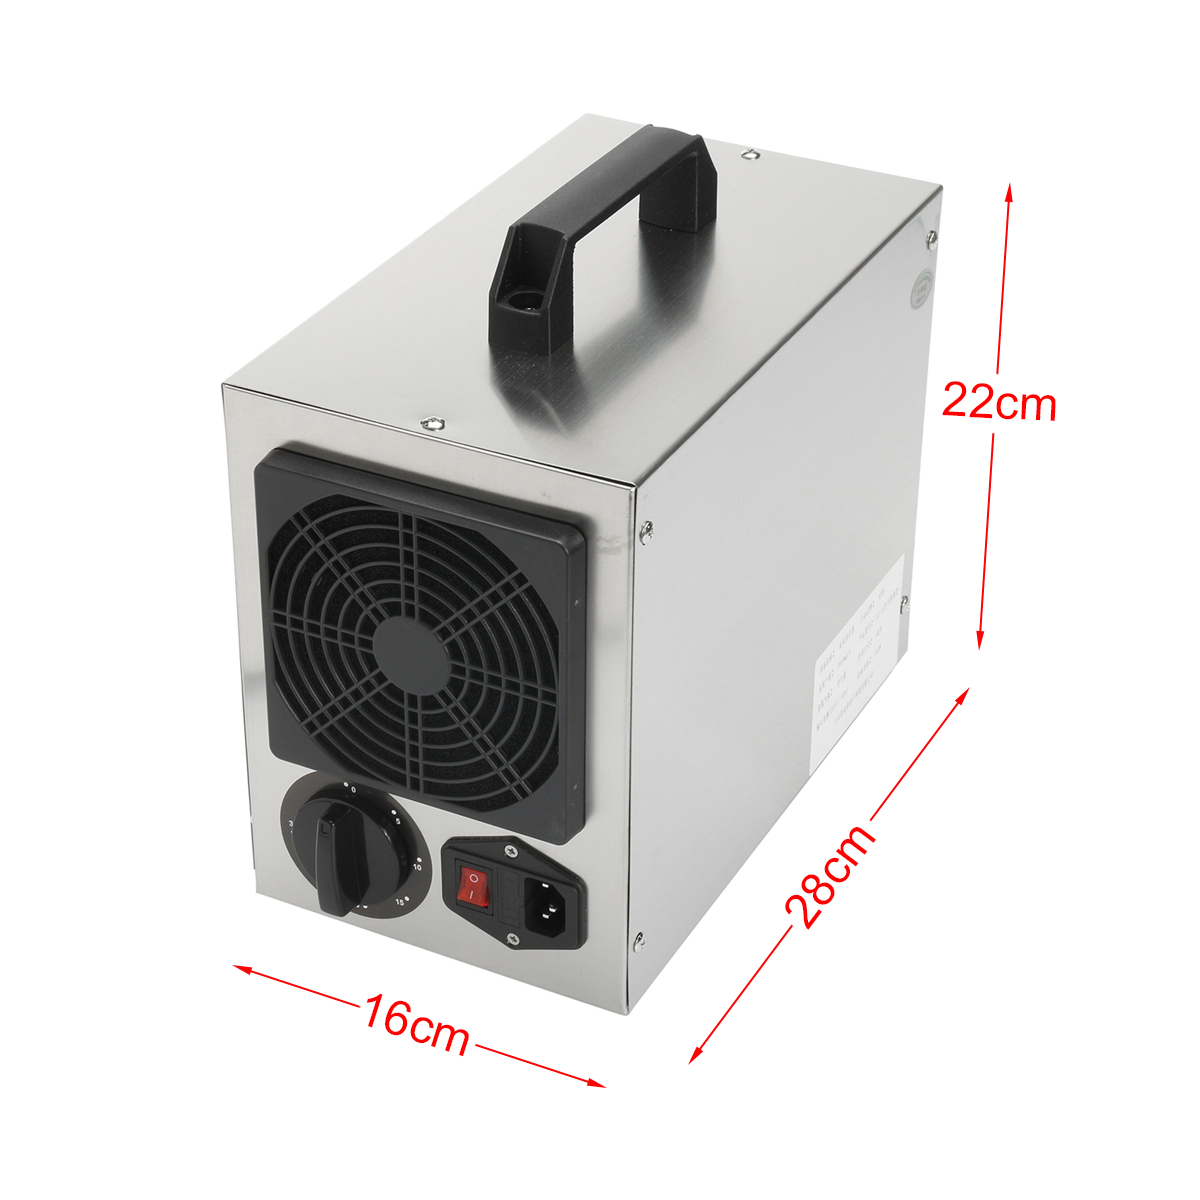 Commercial-Ozone-Generator-7gh-O3-Air-Purifier-Deodorizer-220V110-Aircleaner-1244355-1